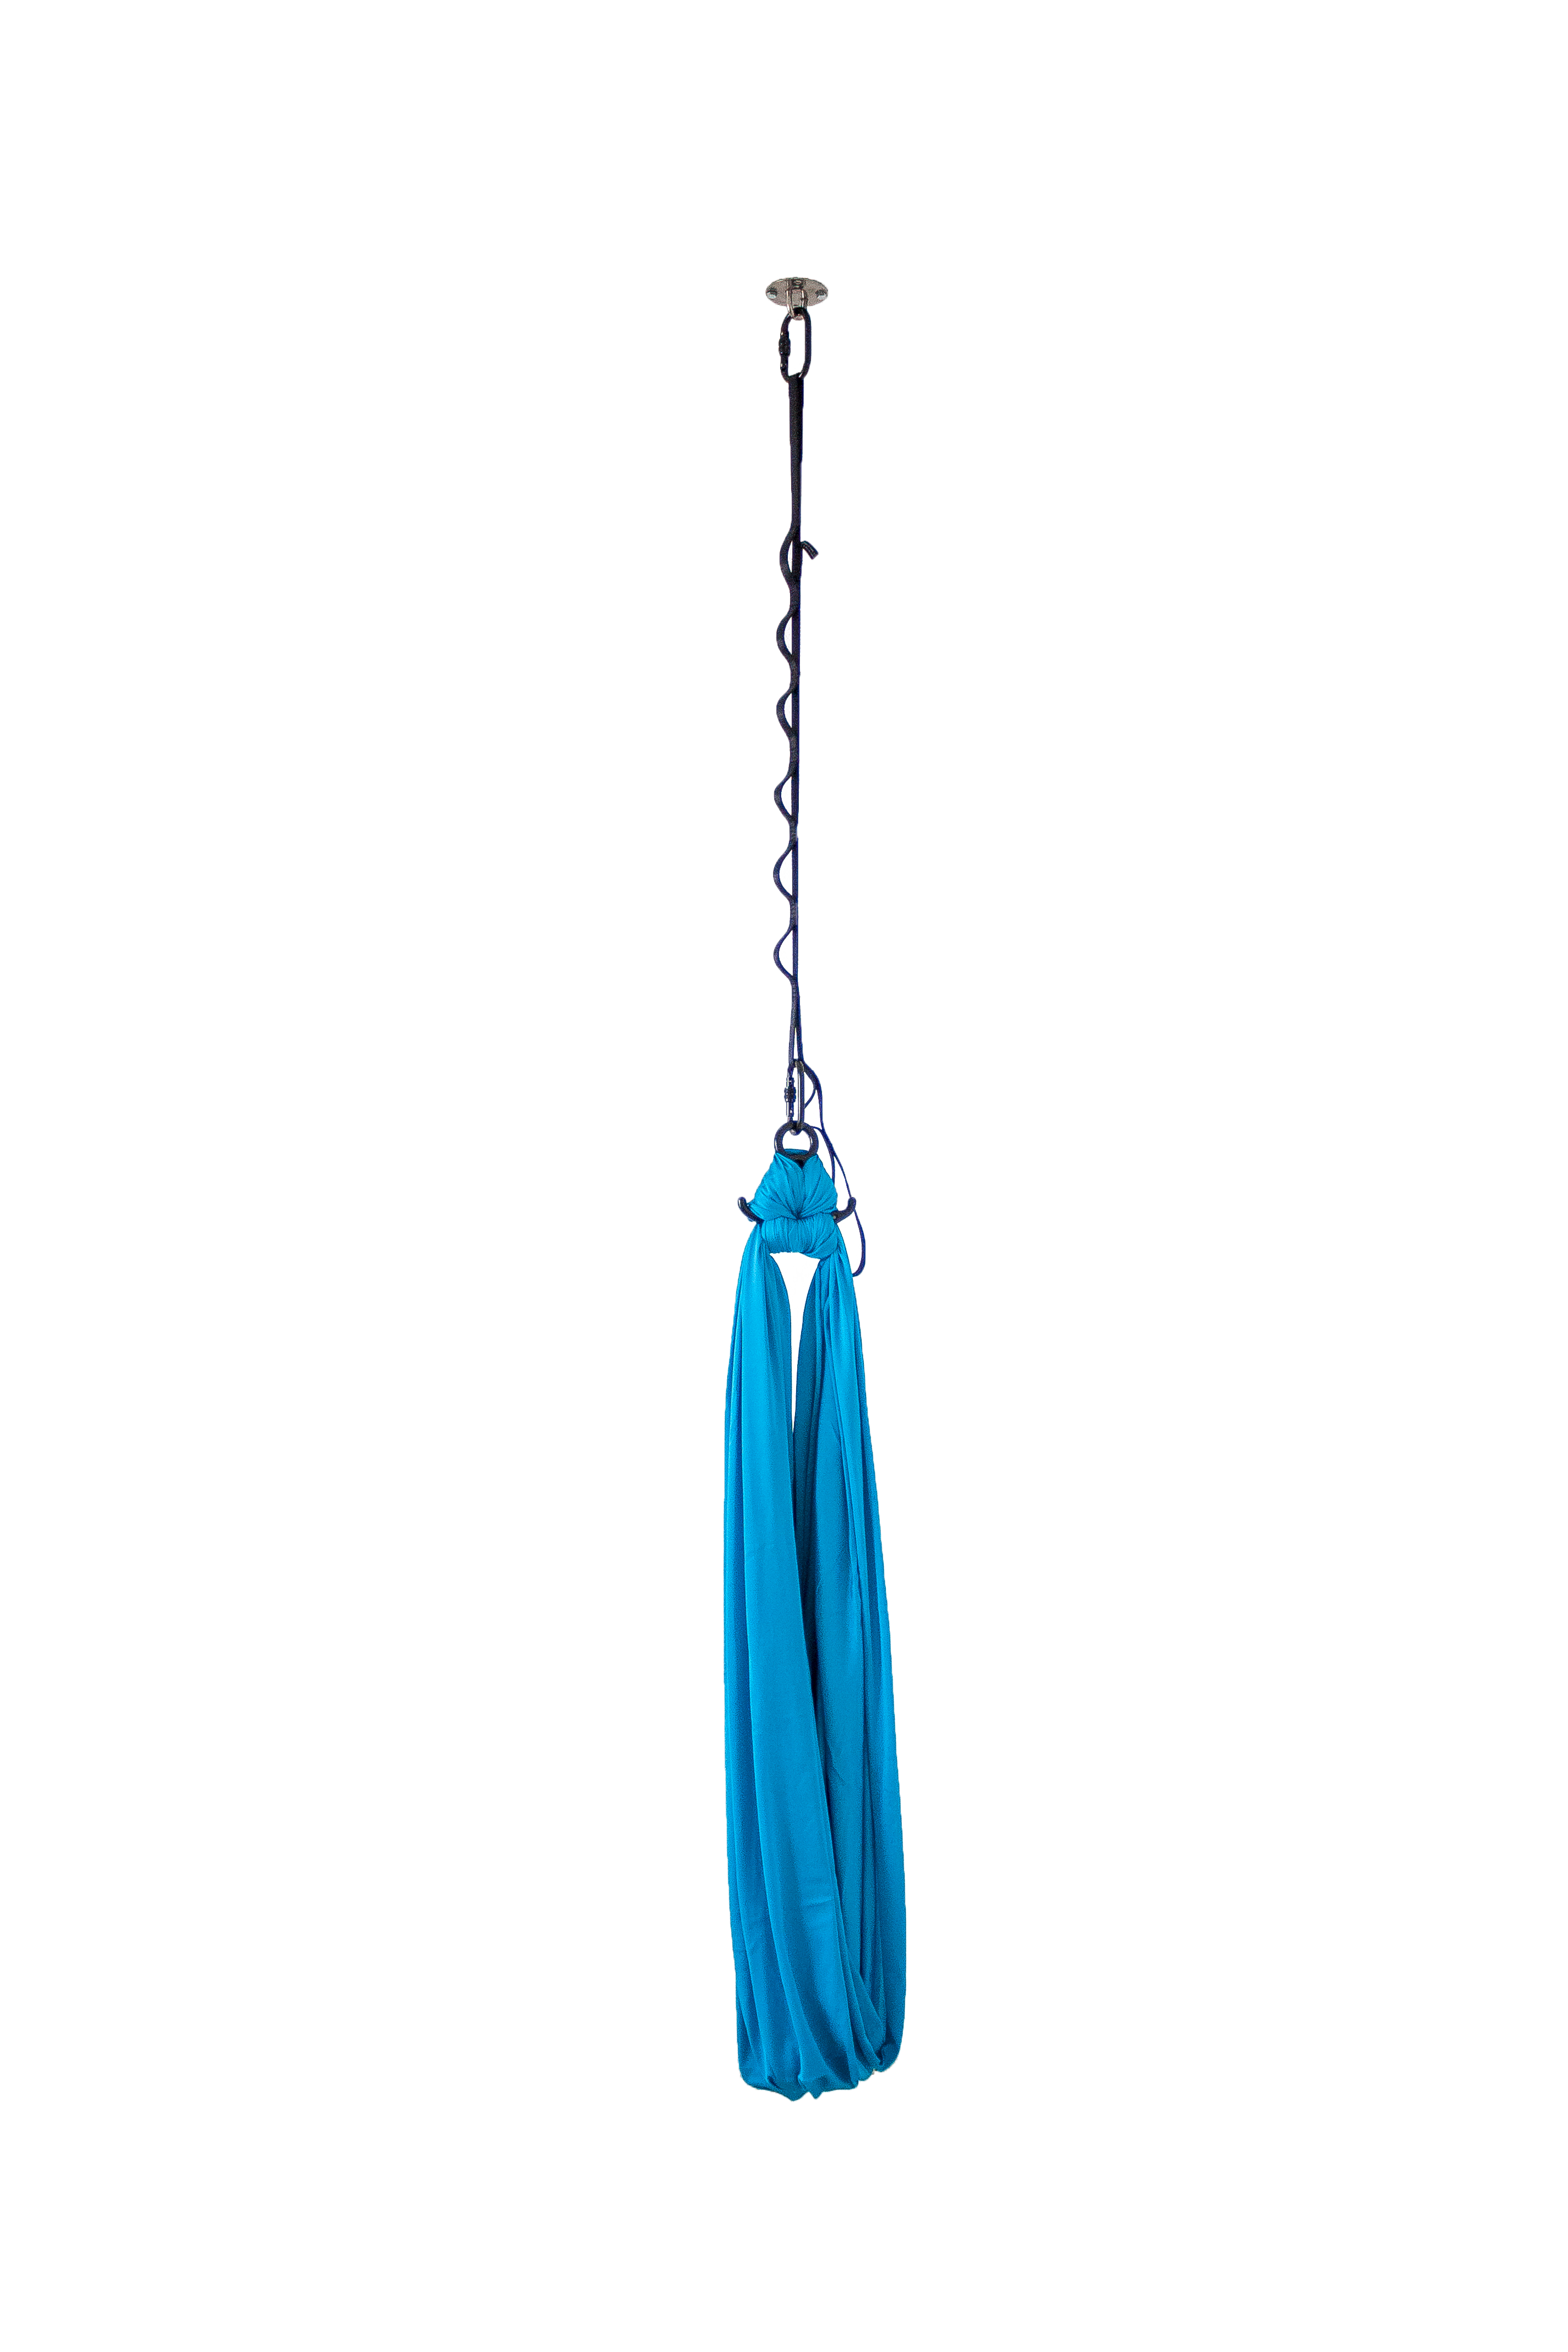 A blue compression swing in a hanging position.